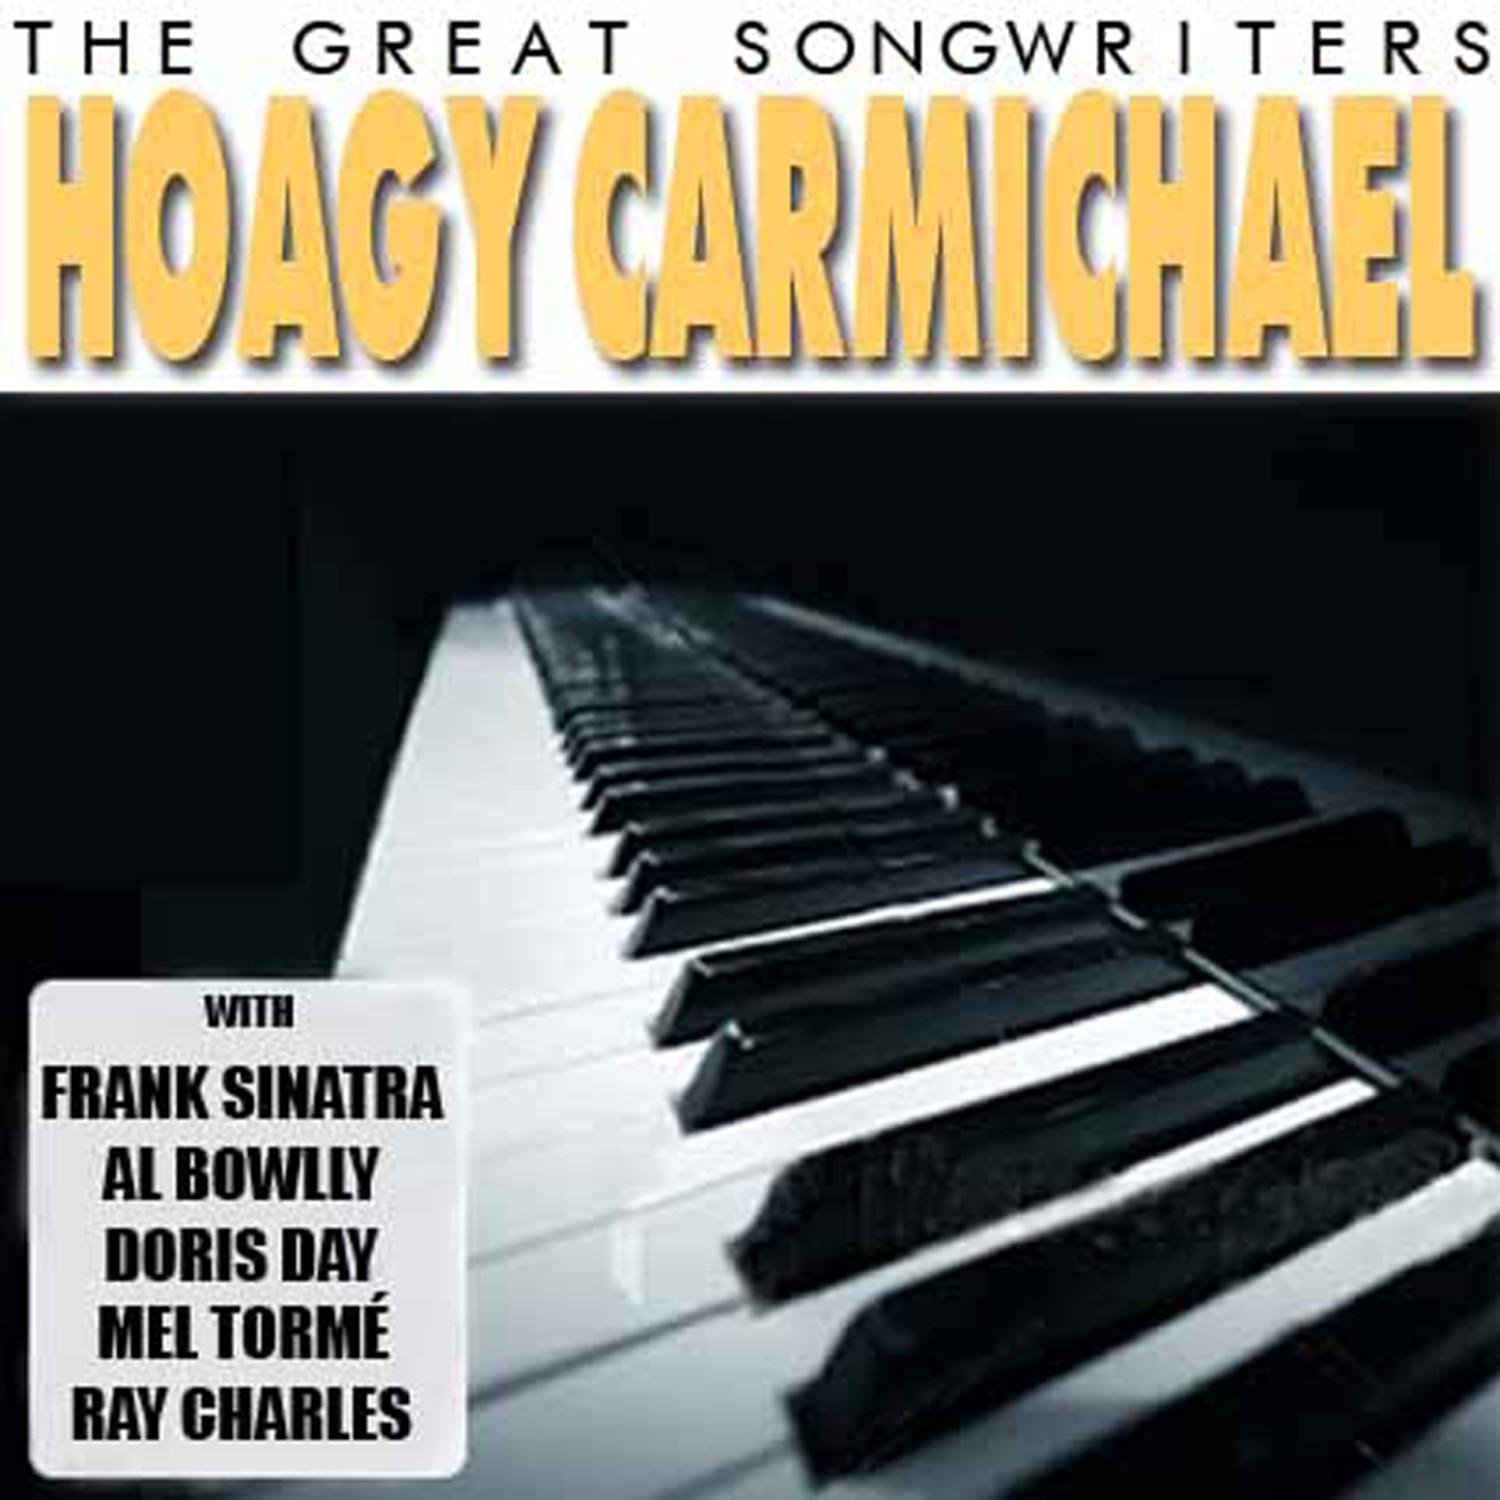 The Great Songwriters - Hoagy Carmichael